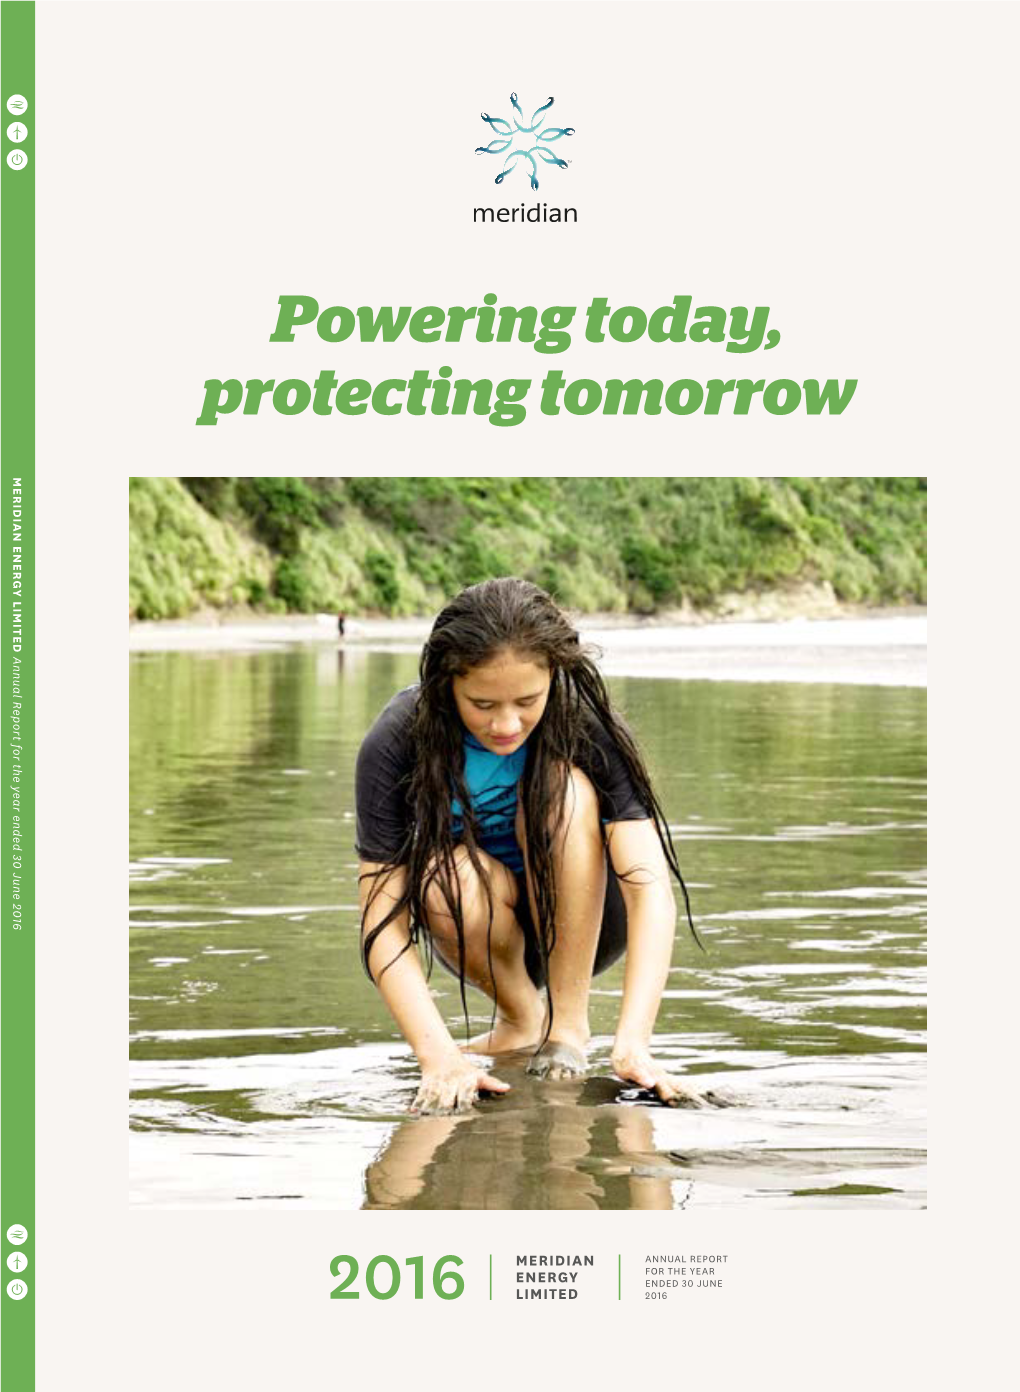 Powering Today, Protecting Tomorrow Annual Report for the Year Ended 30 June 2016 June 30 Ended Year the MERIDIAN for ENERGY LIMITED Report Annual